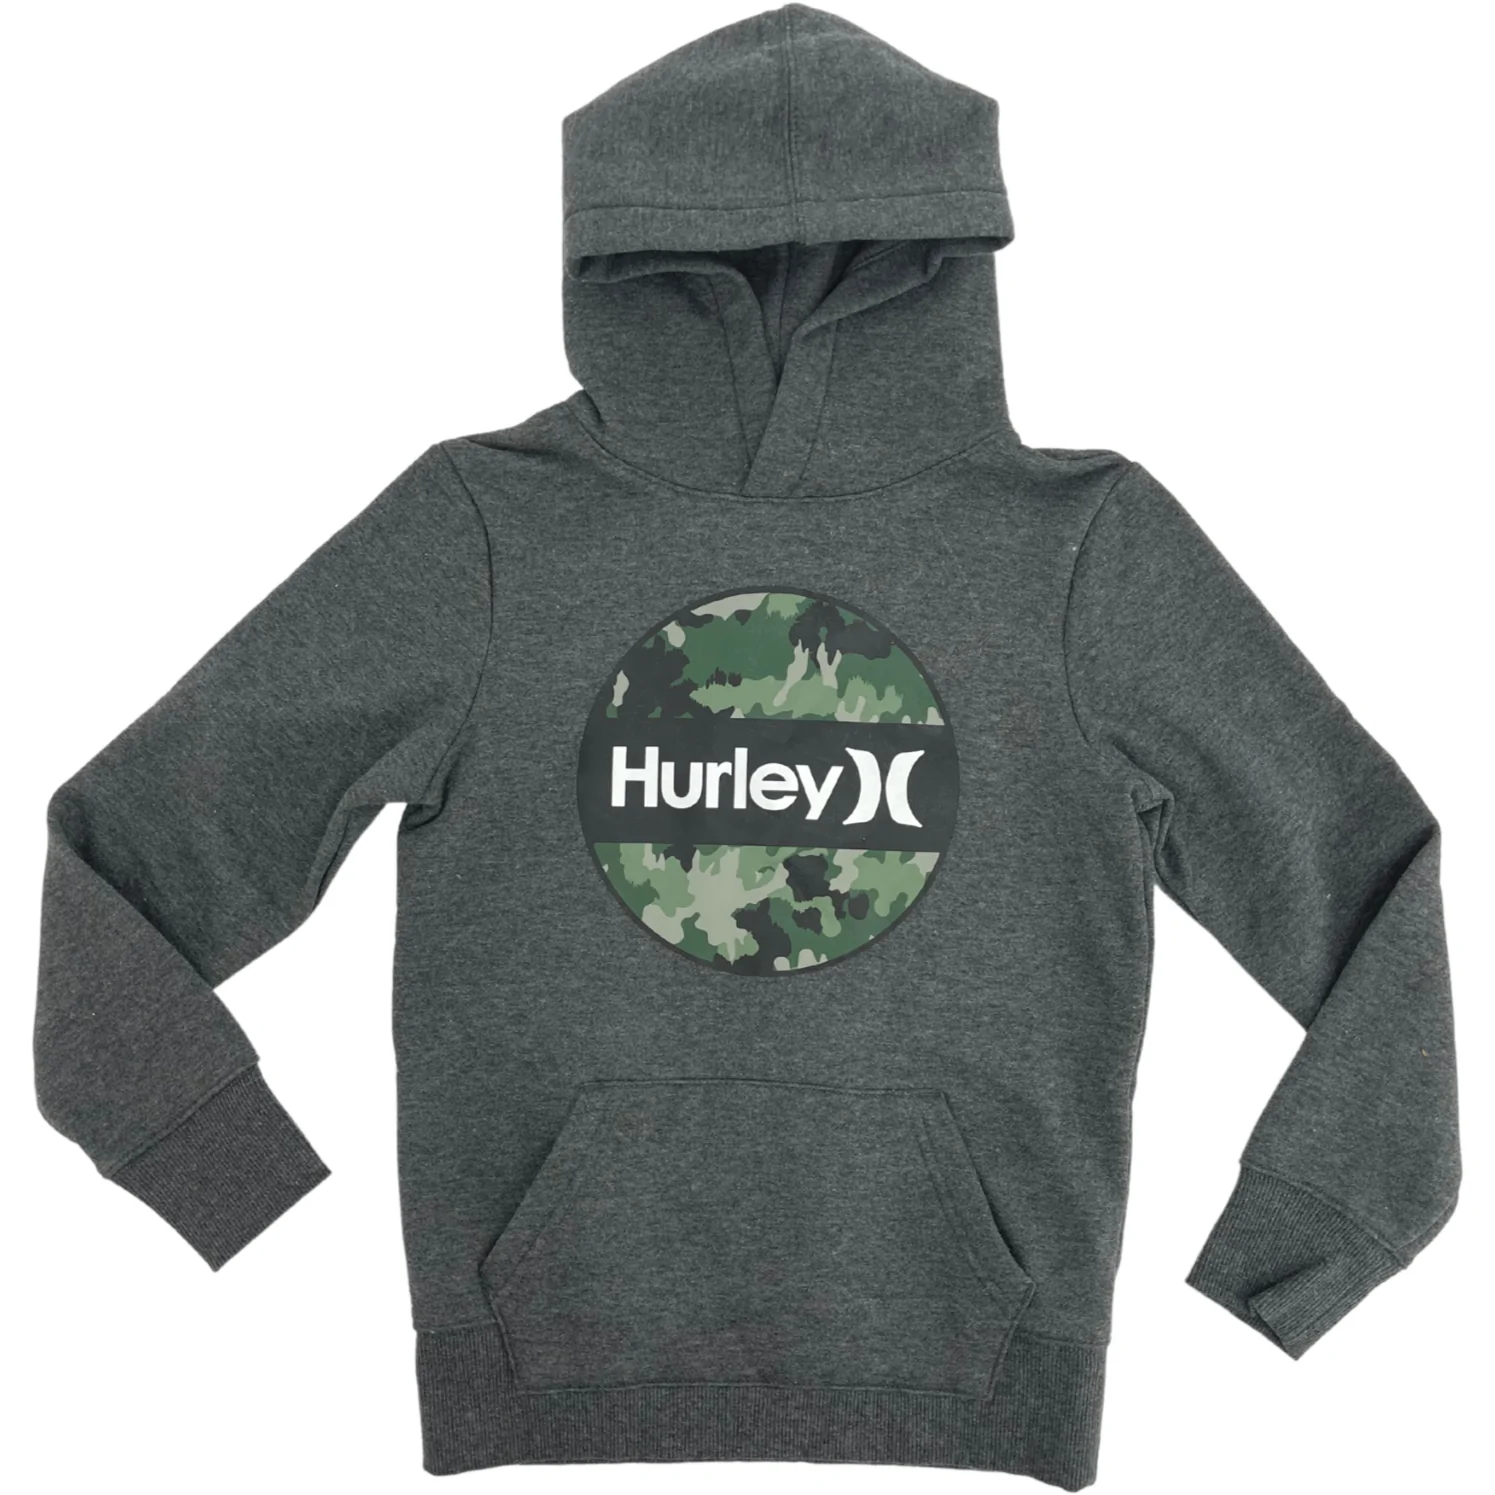 Hurley Boy's Fleece Hoodie / Pullover Sweater / Grey & Camouflage / Size 7/8 **No Tags**